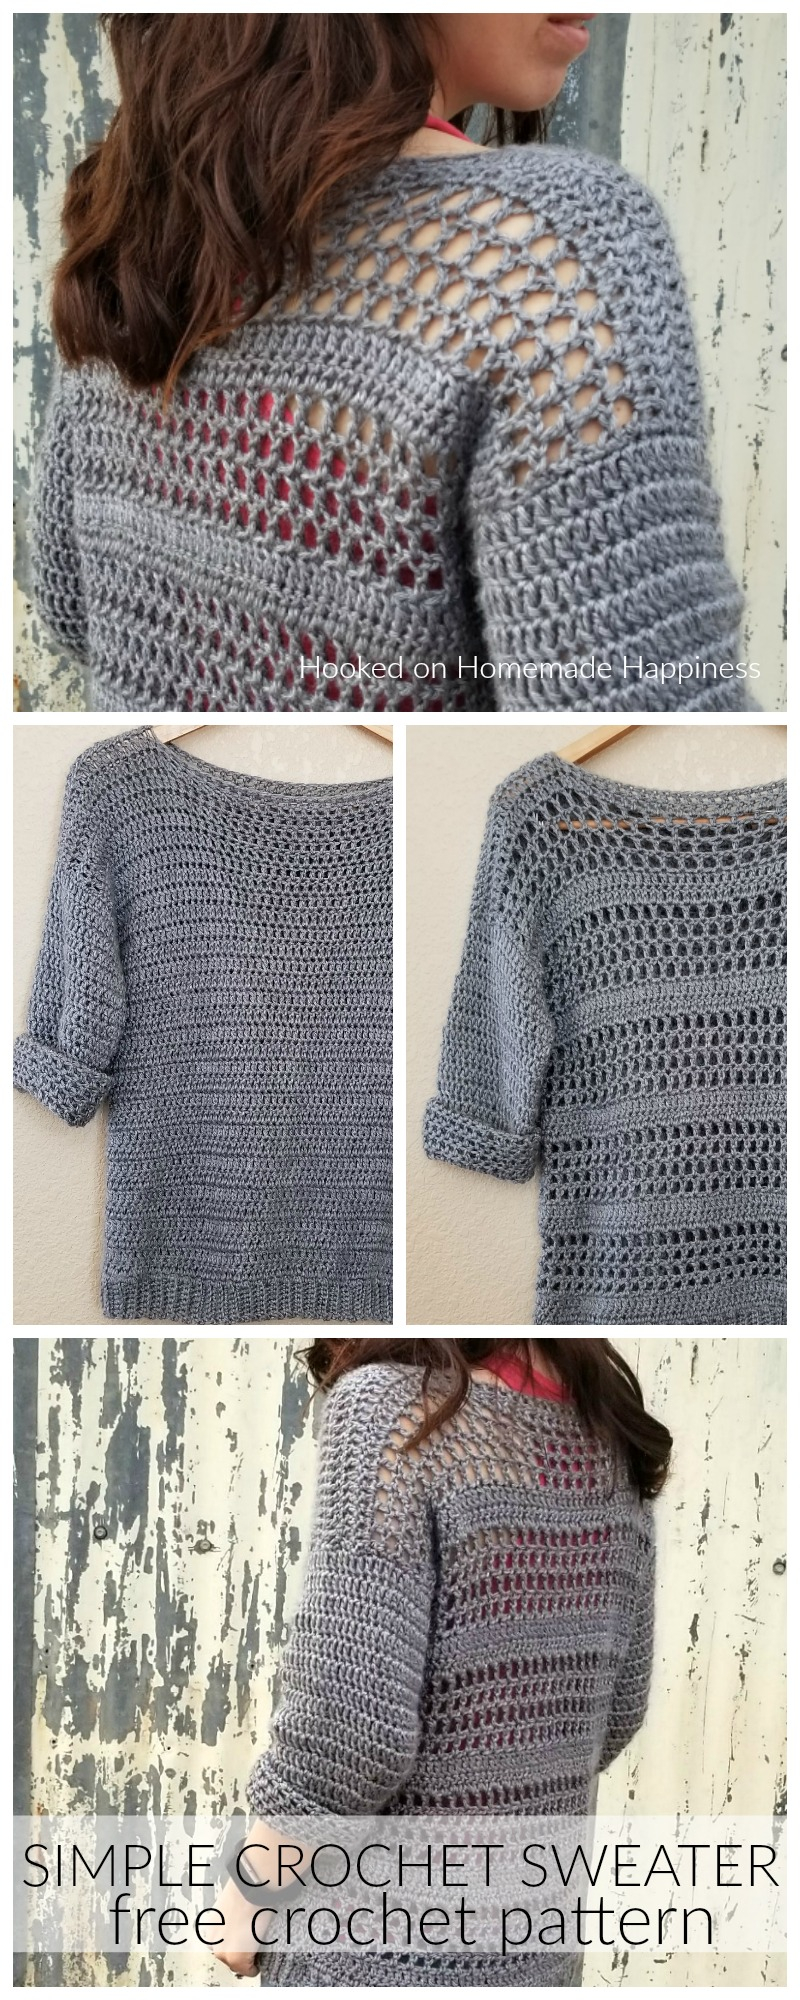 Simple Knit Sweater Pattern Free Simple Crochet Sweater Pattern Hooked On Homemade Happiness